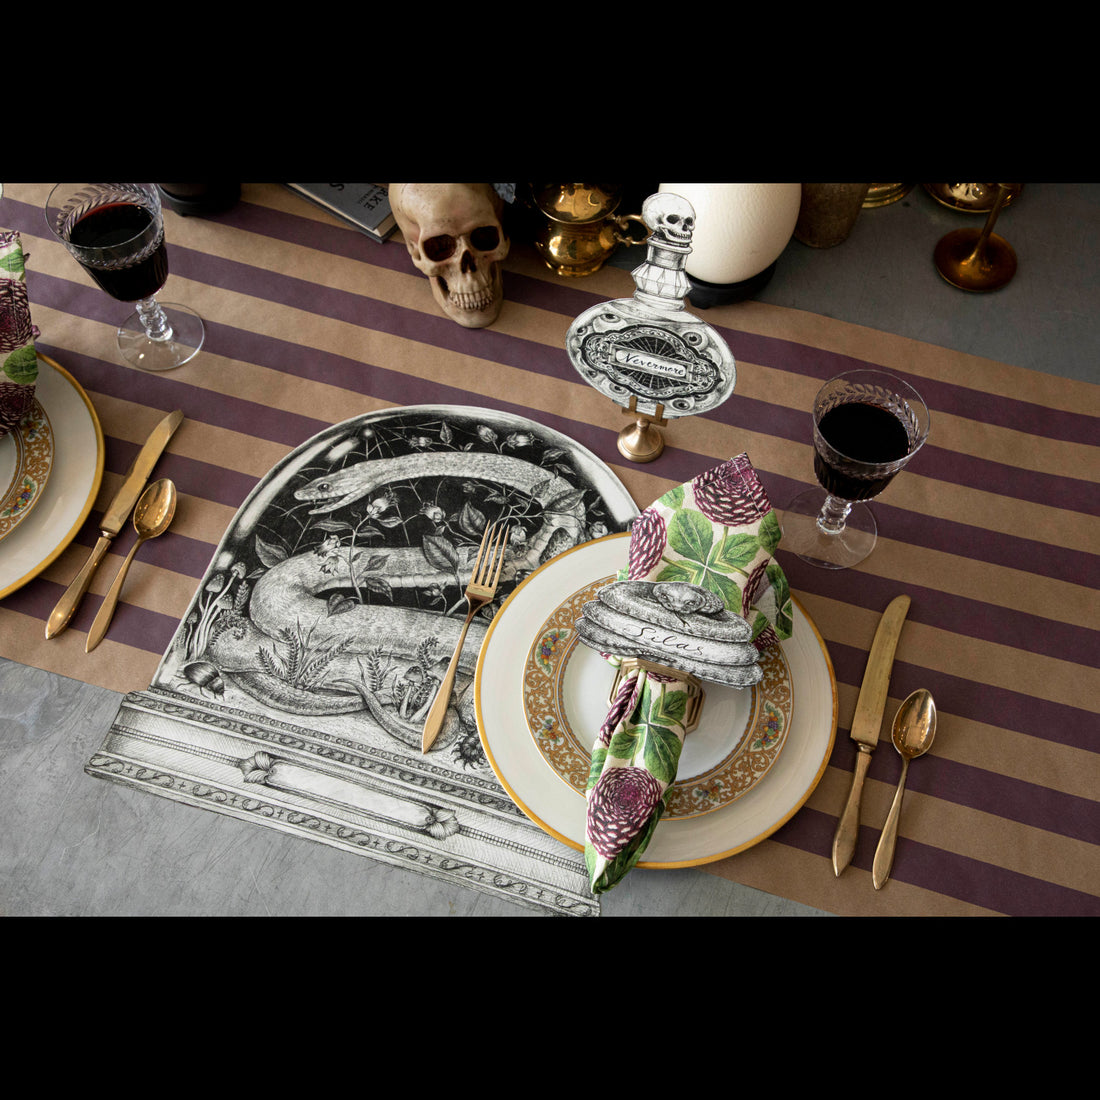 The Die-cut Snake Cloche Placemat under a spooky Halloween-themed place setting.